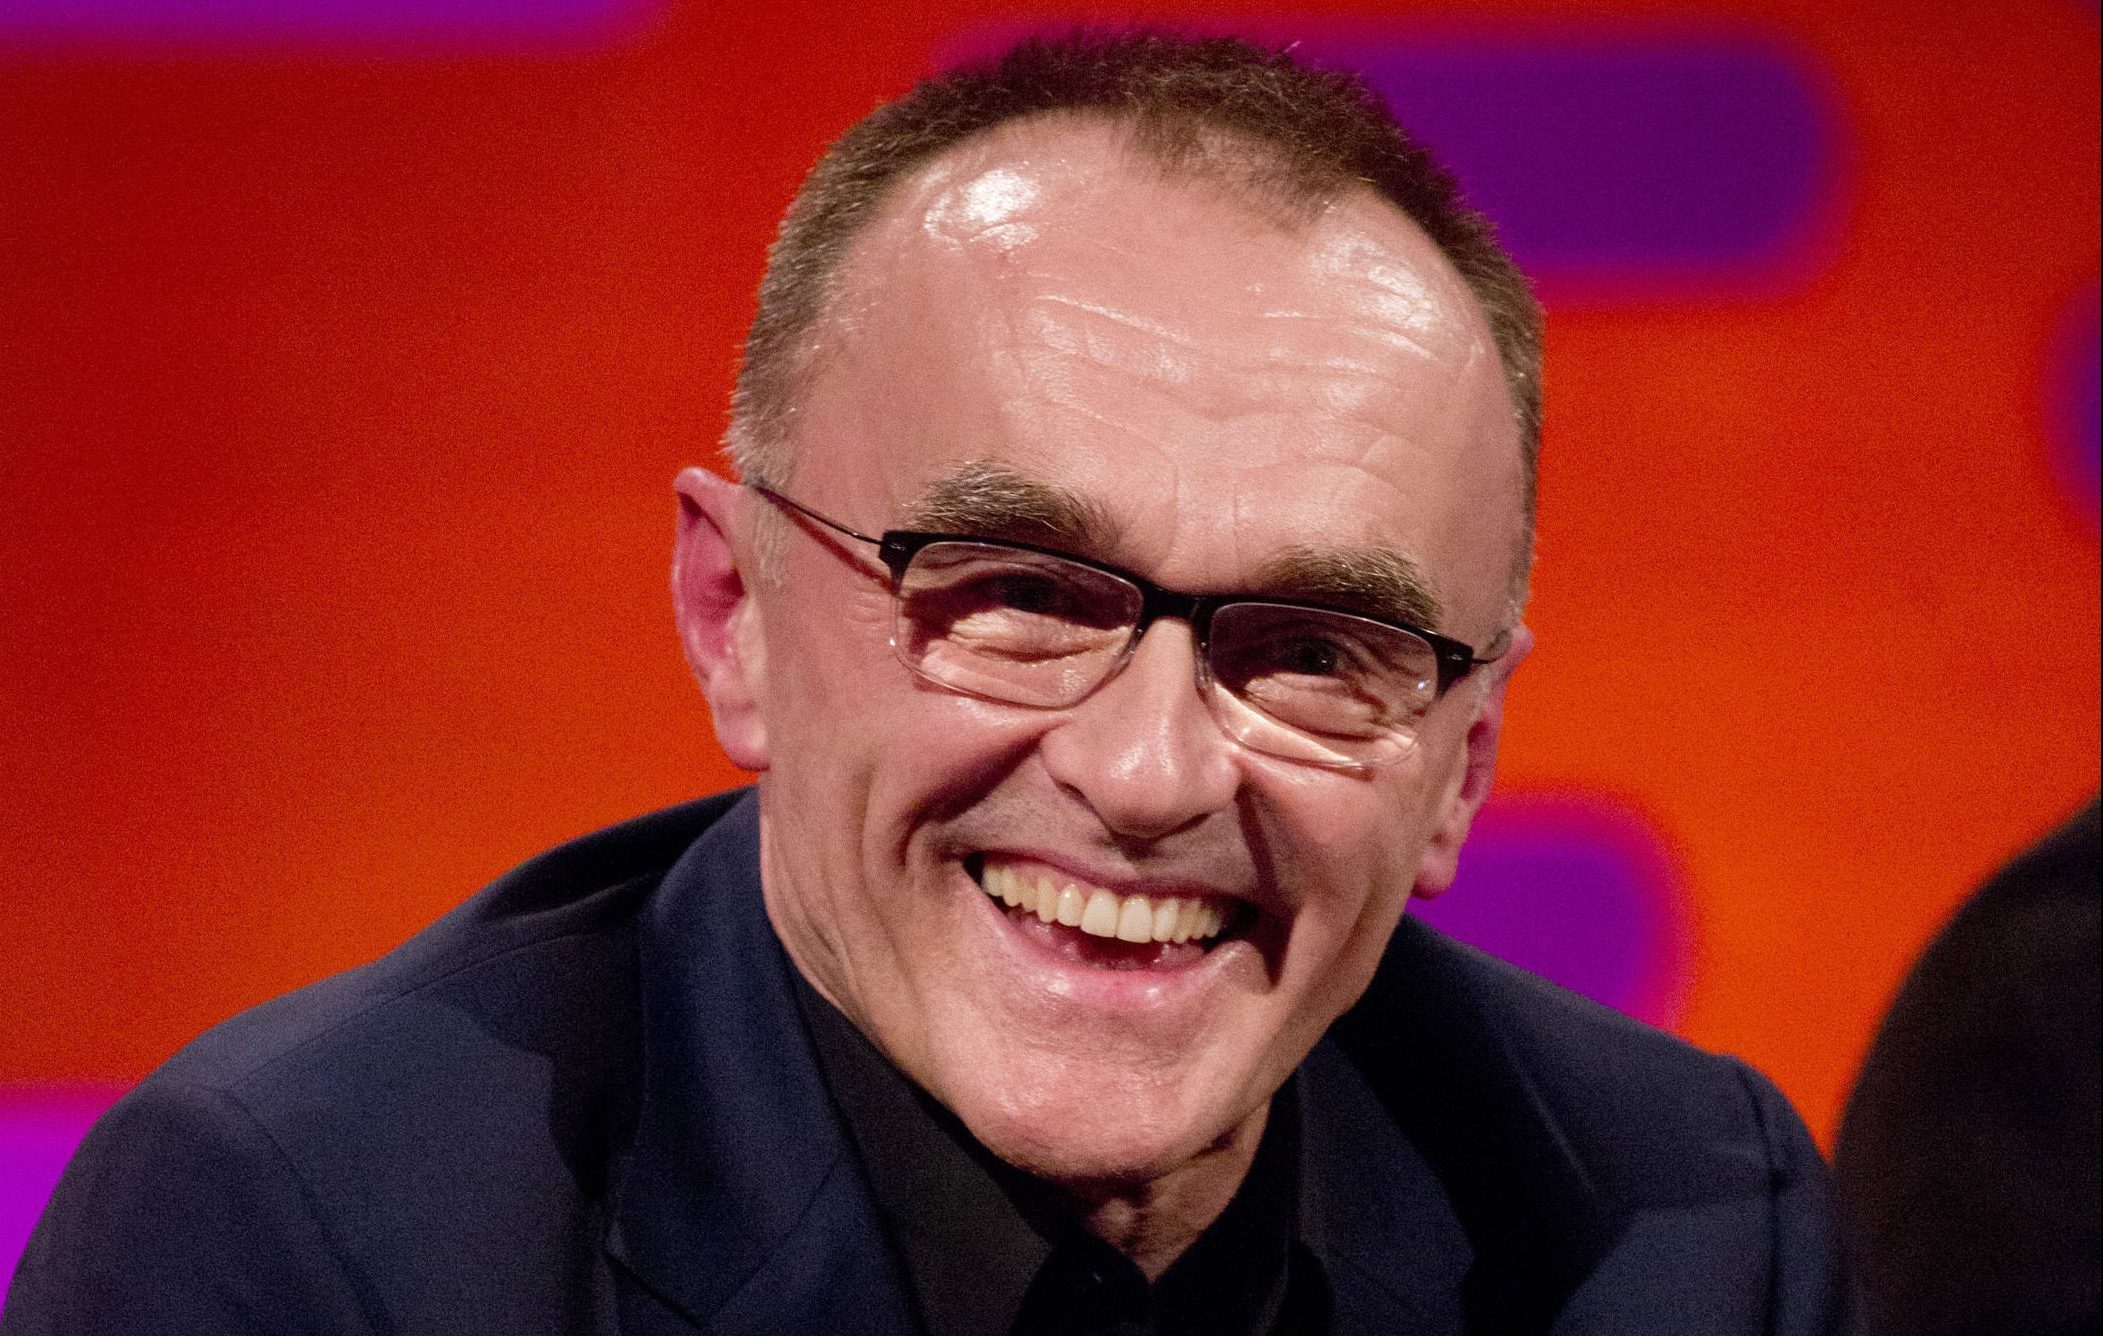 Danny Boyle (PA Images on behalf of So TV)